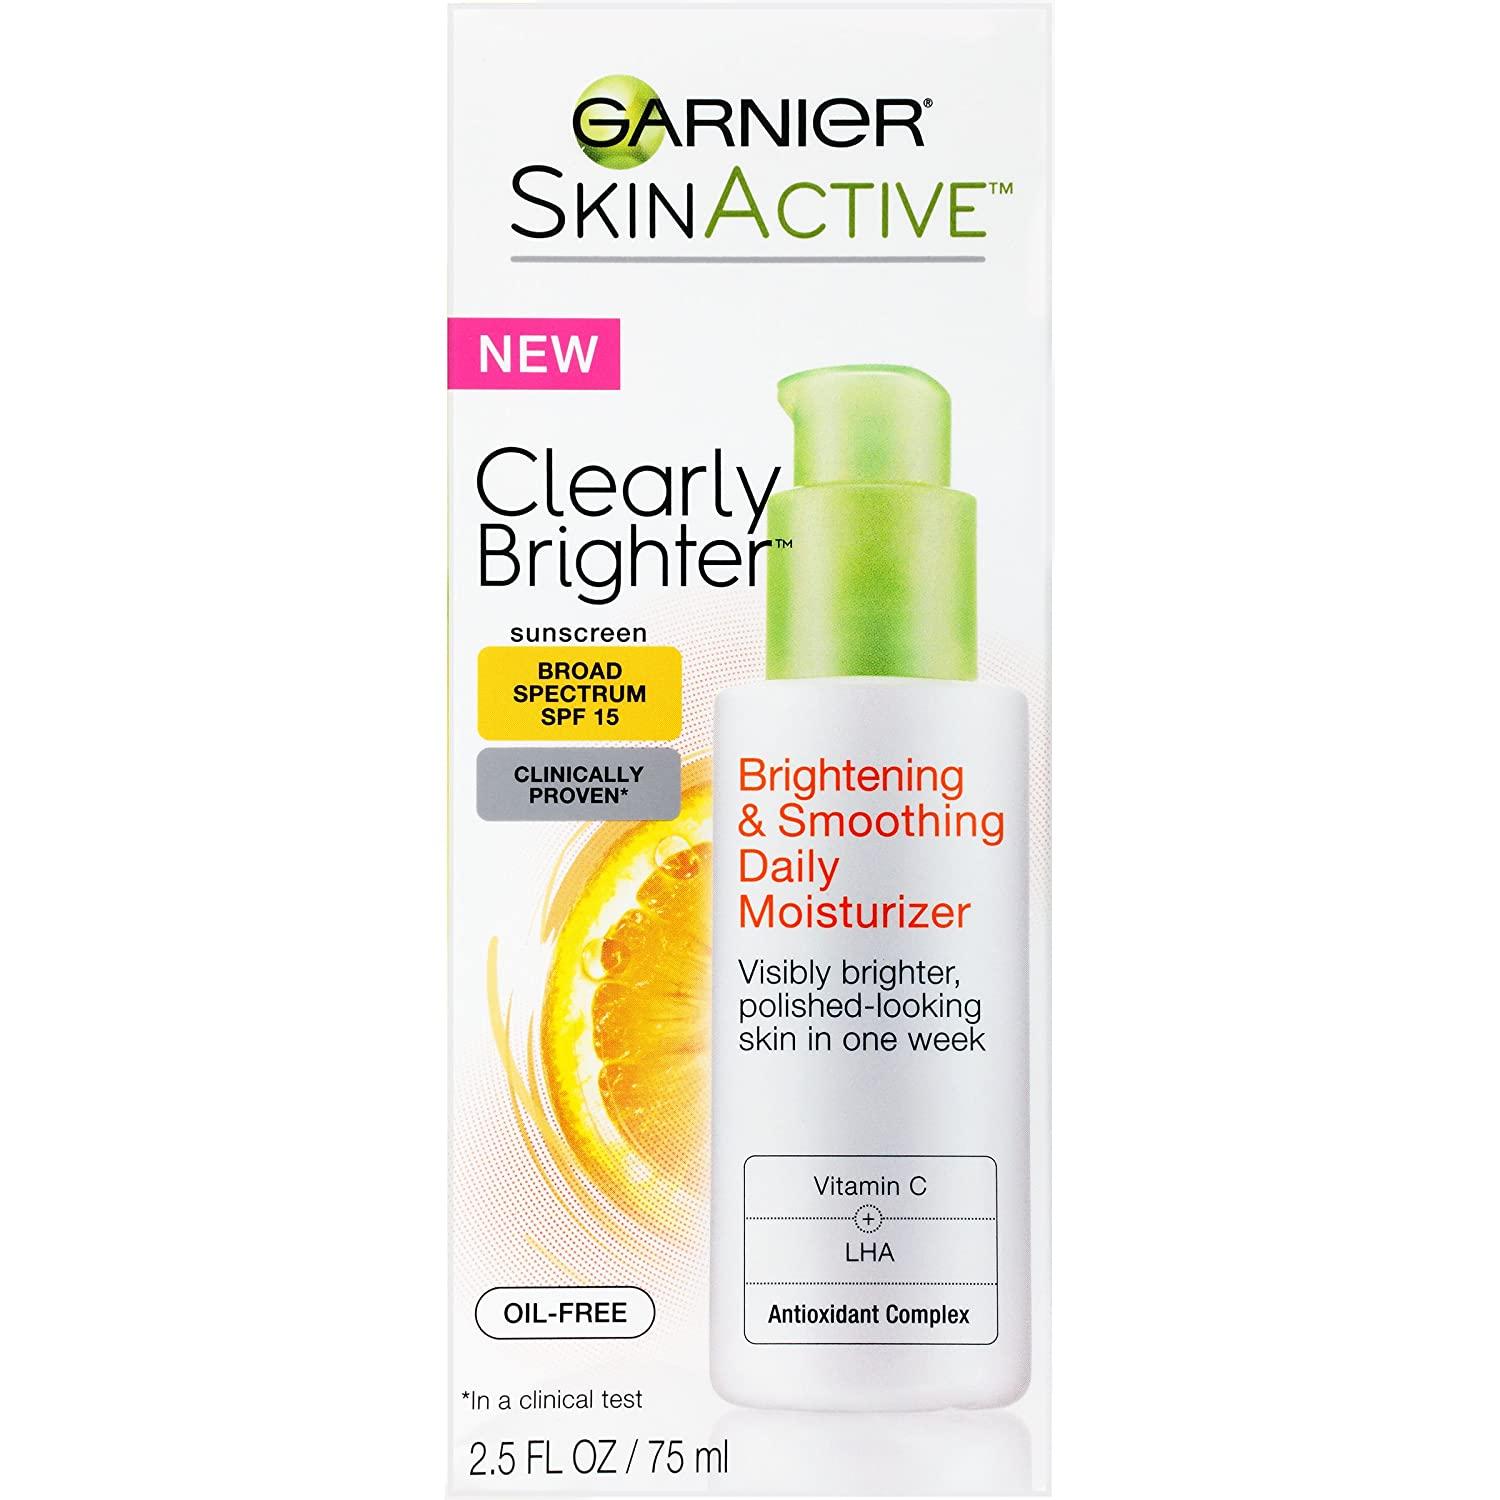 SkinActive Clearly Brighter Brightening & Smoothing Daily Moisturizer SPF 15